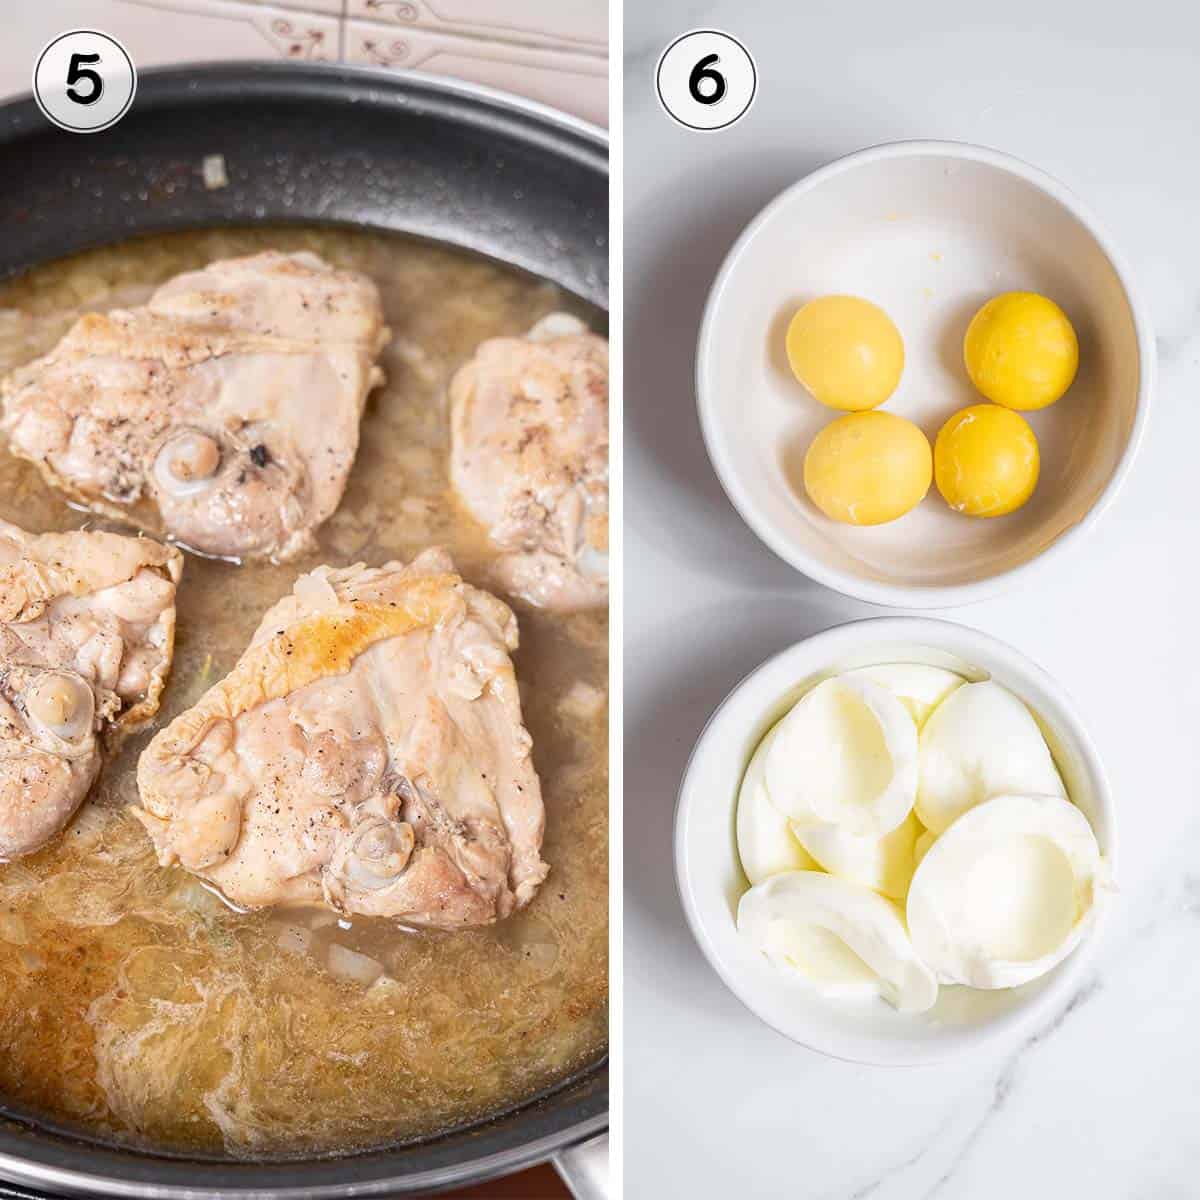 cooking chicken and separating boiled eggs.